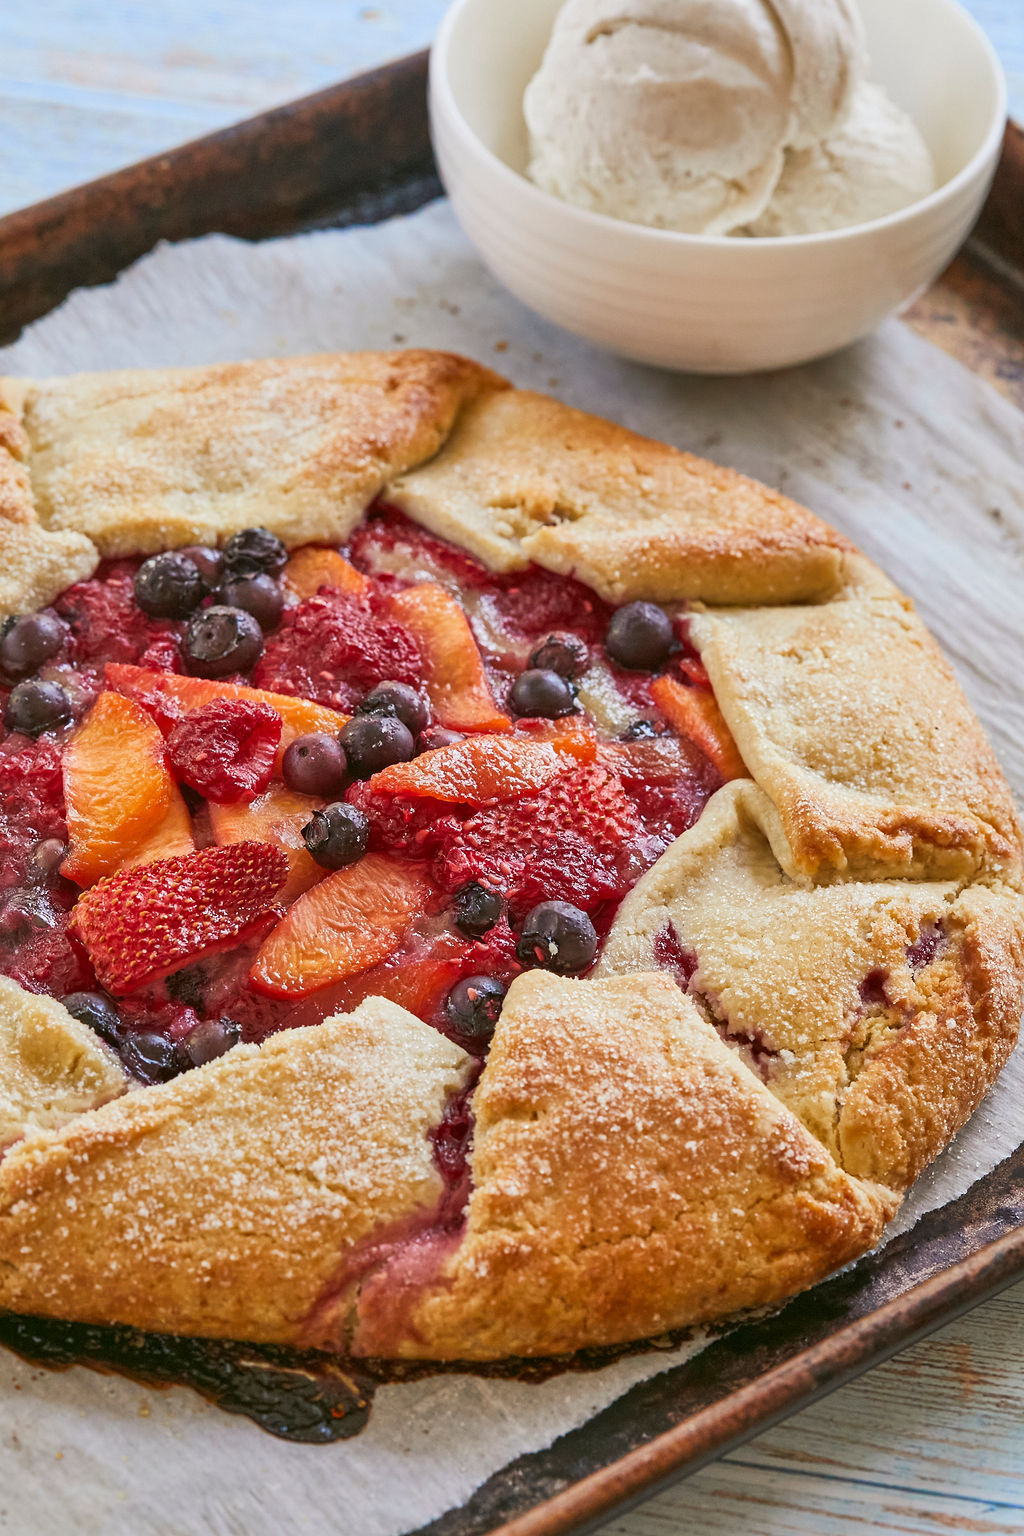 Rustic Summer Fruit Galette baked and filled with berries and frangipane.